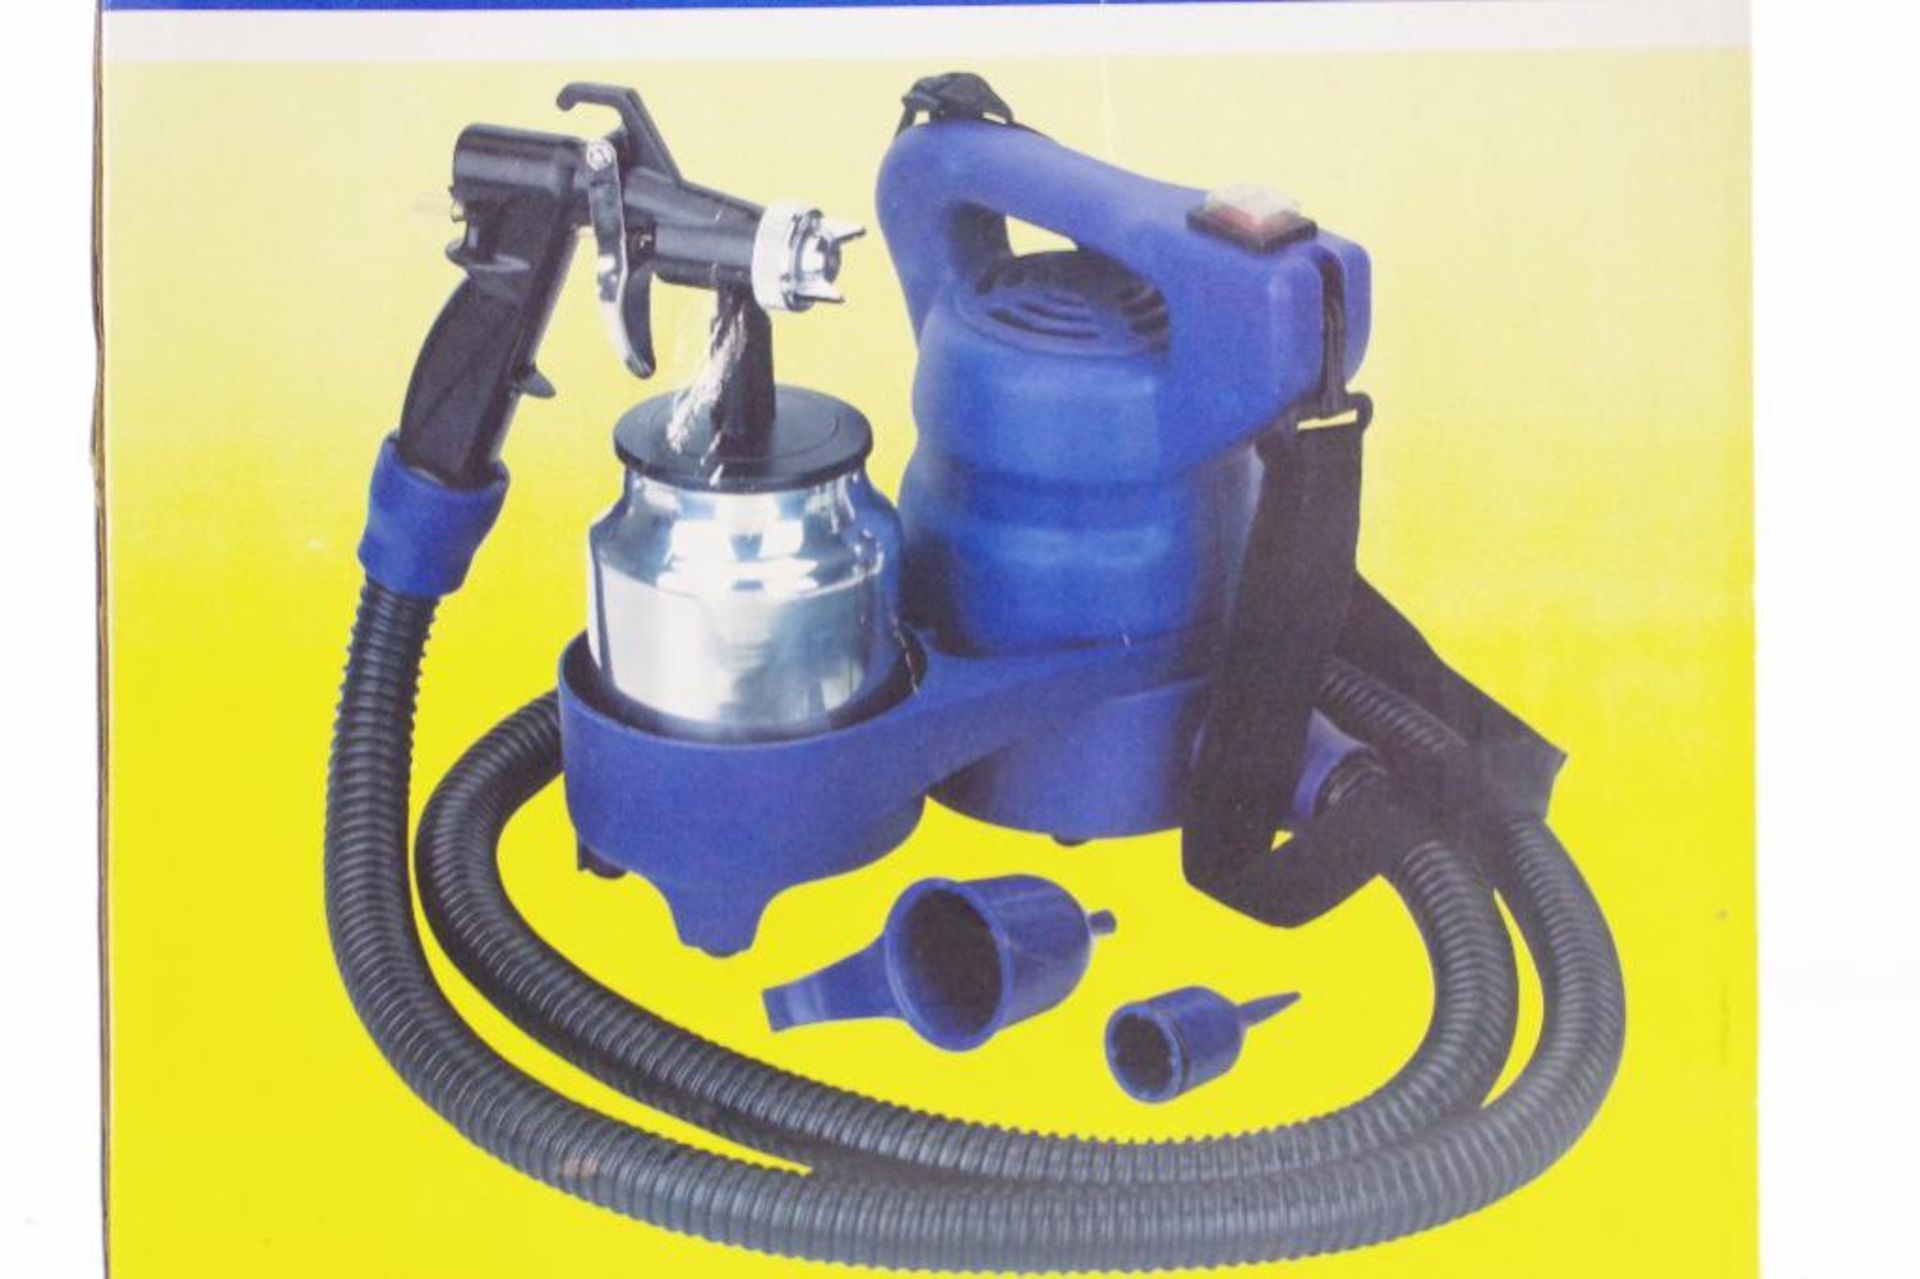 UNUSED CHICAGO ELECTRIC, Electric HVLP Paint Sprayer M/N 91772